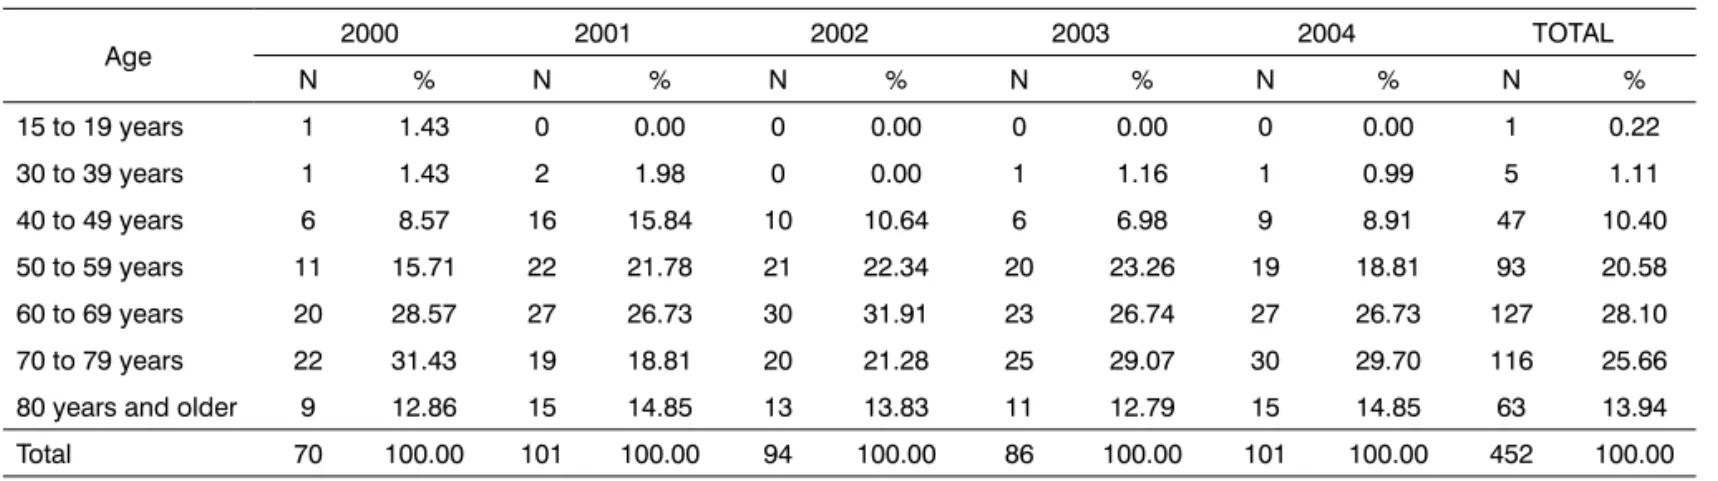 Table 1. Death rates by laryngeal cancer in Pernambuco, broken down by age during 2000-2004.